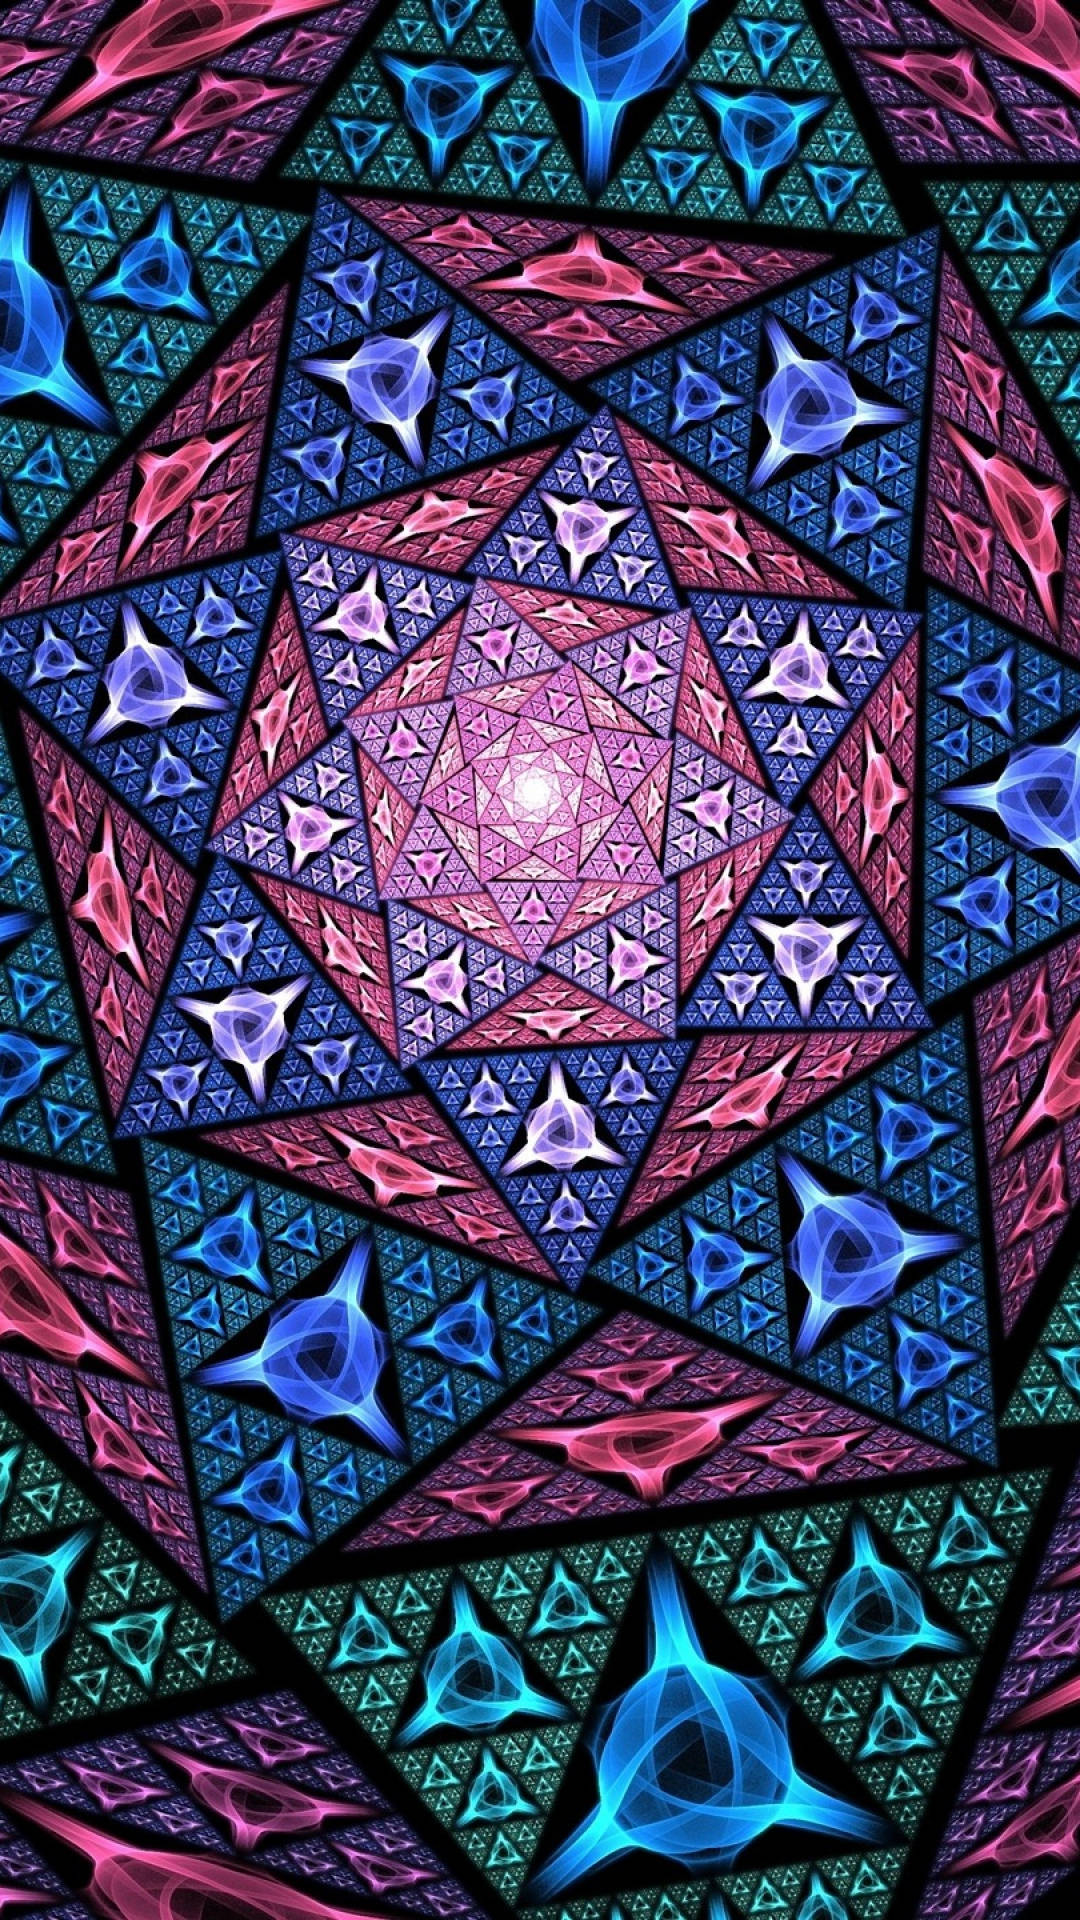 Psychedelic Iphone Triangular Patterns